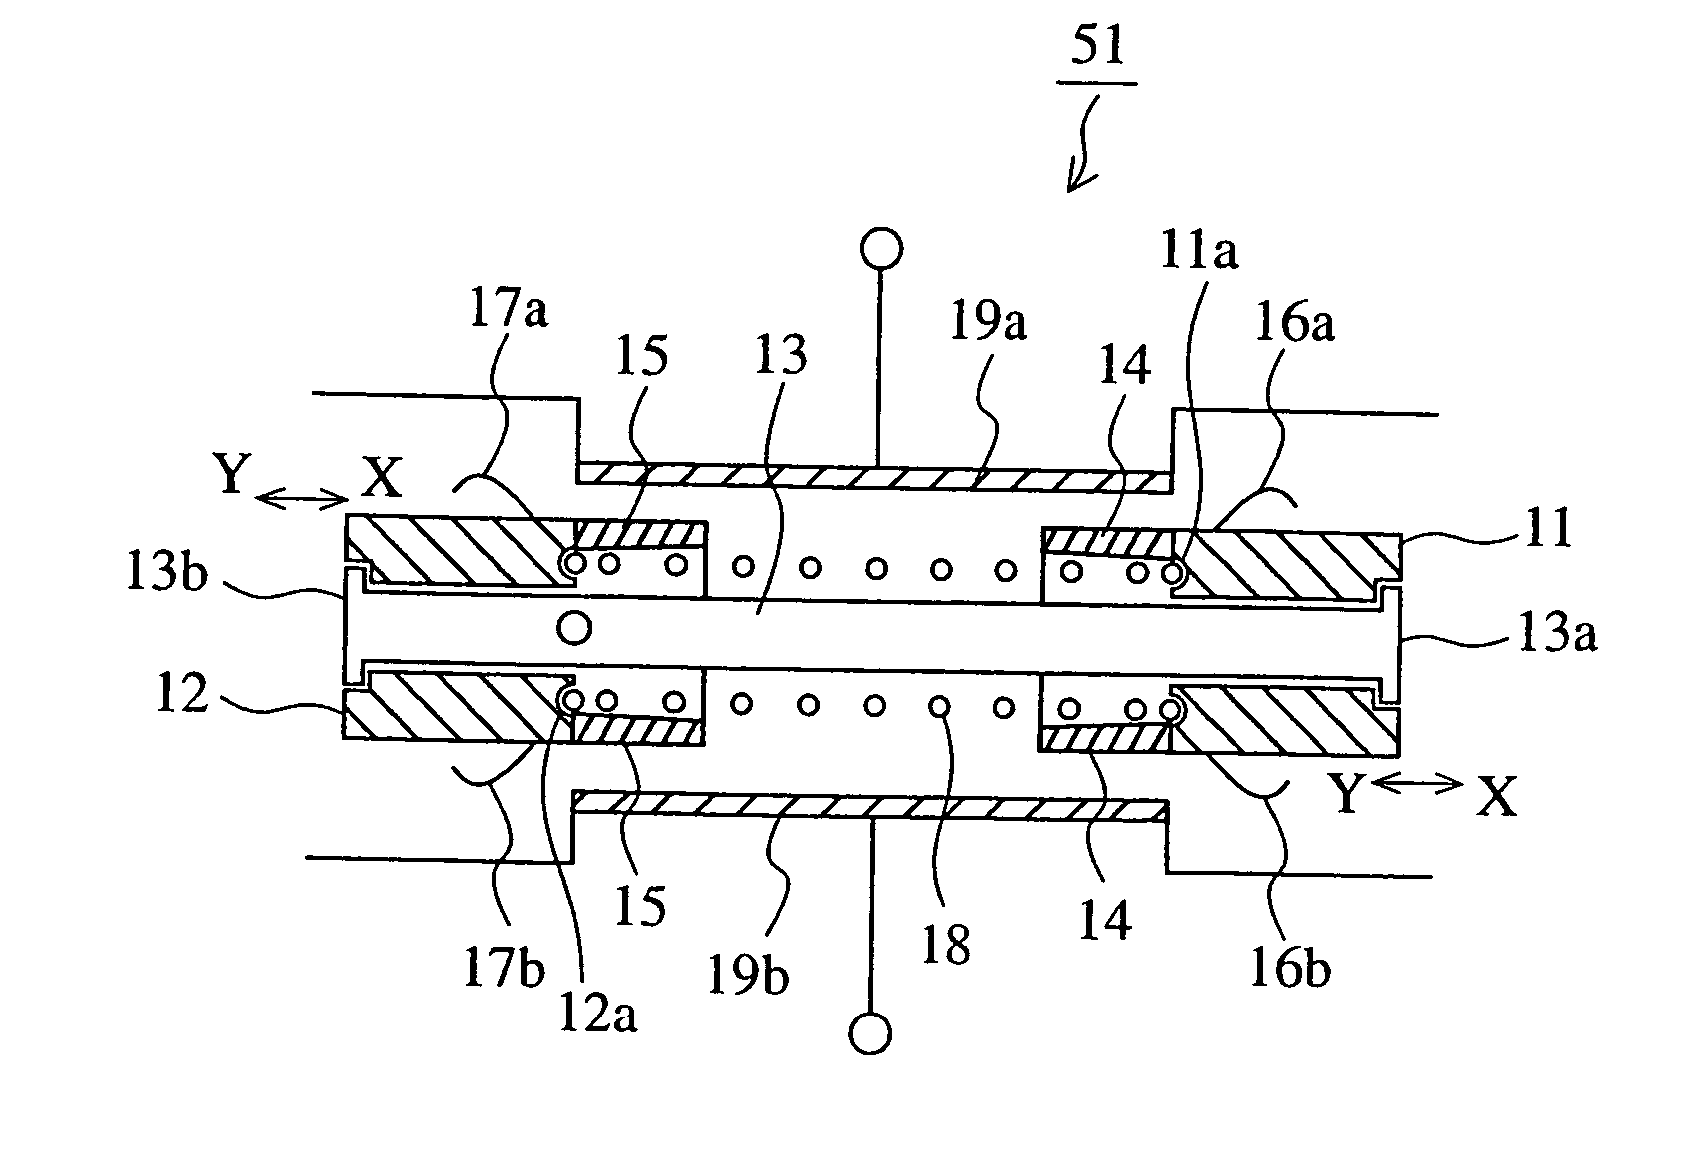 Acceleration detector and passive safety device